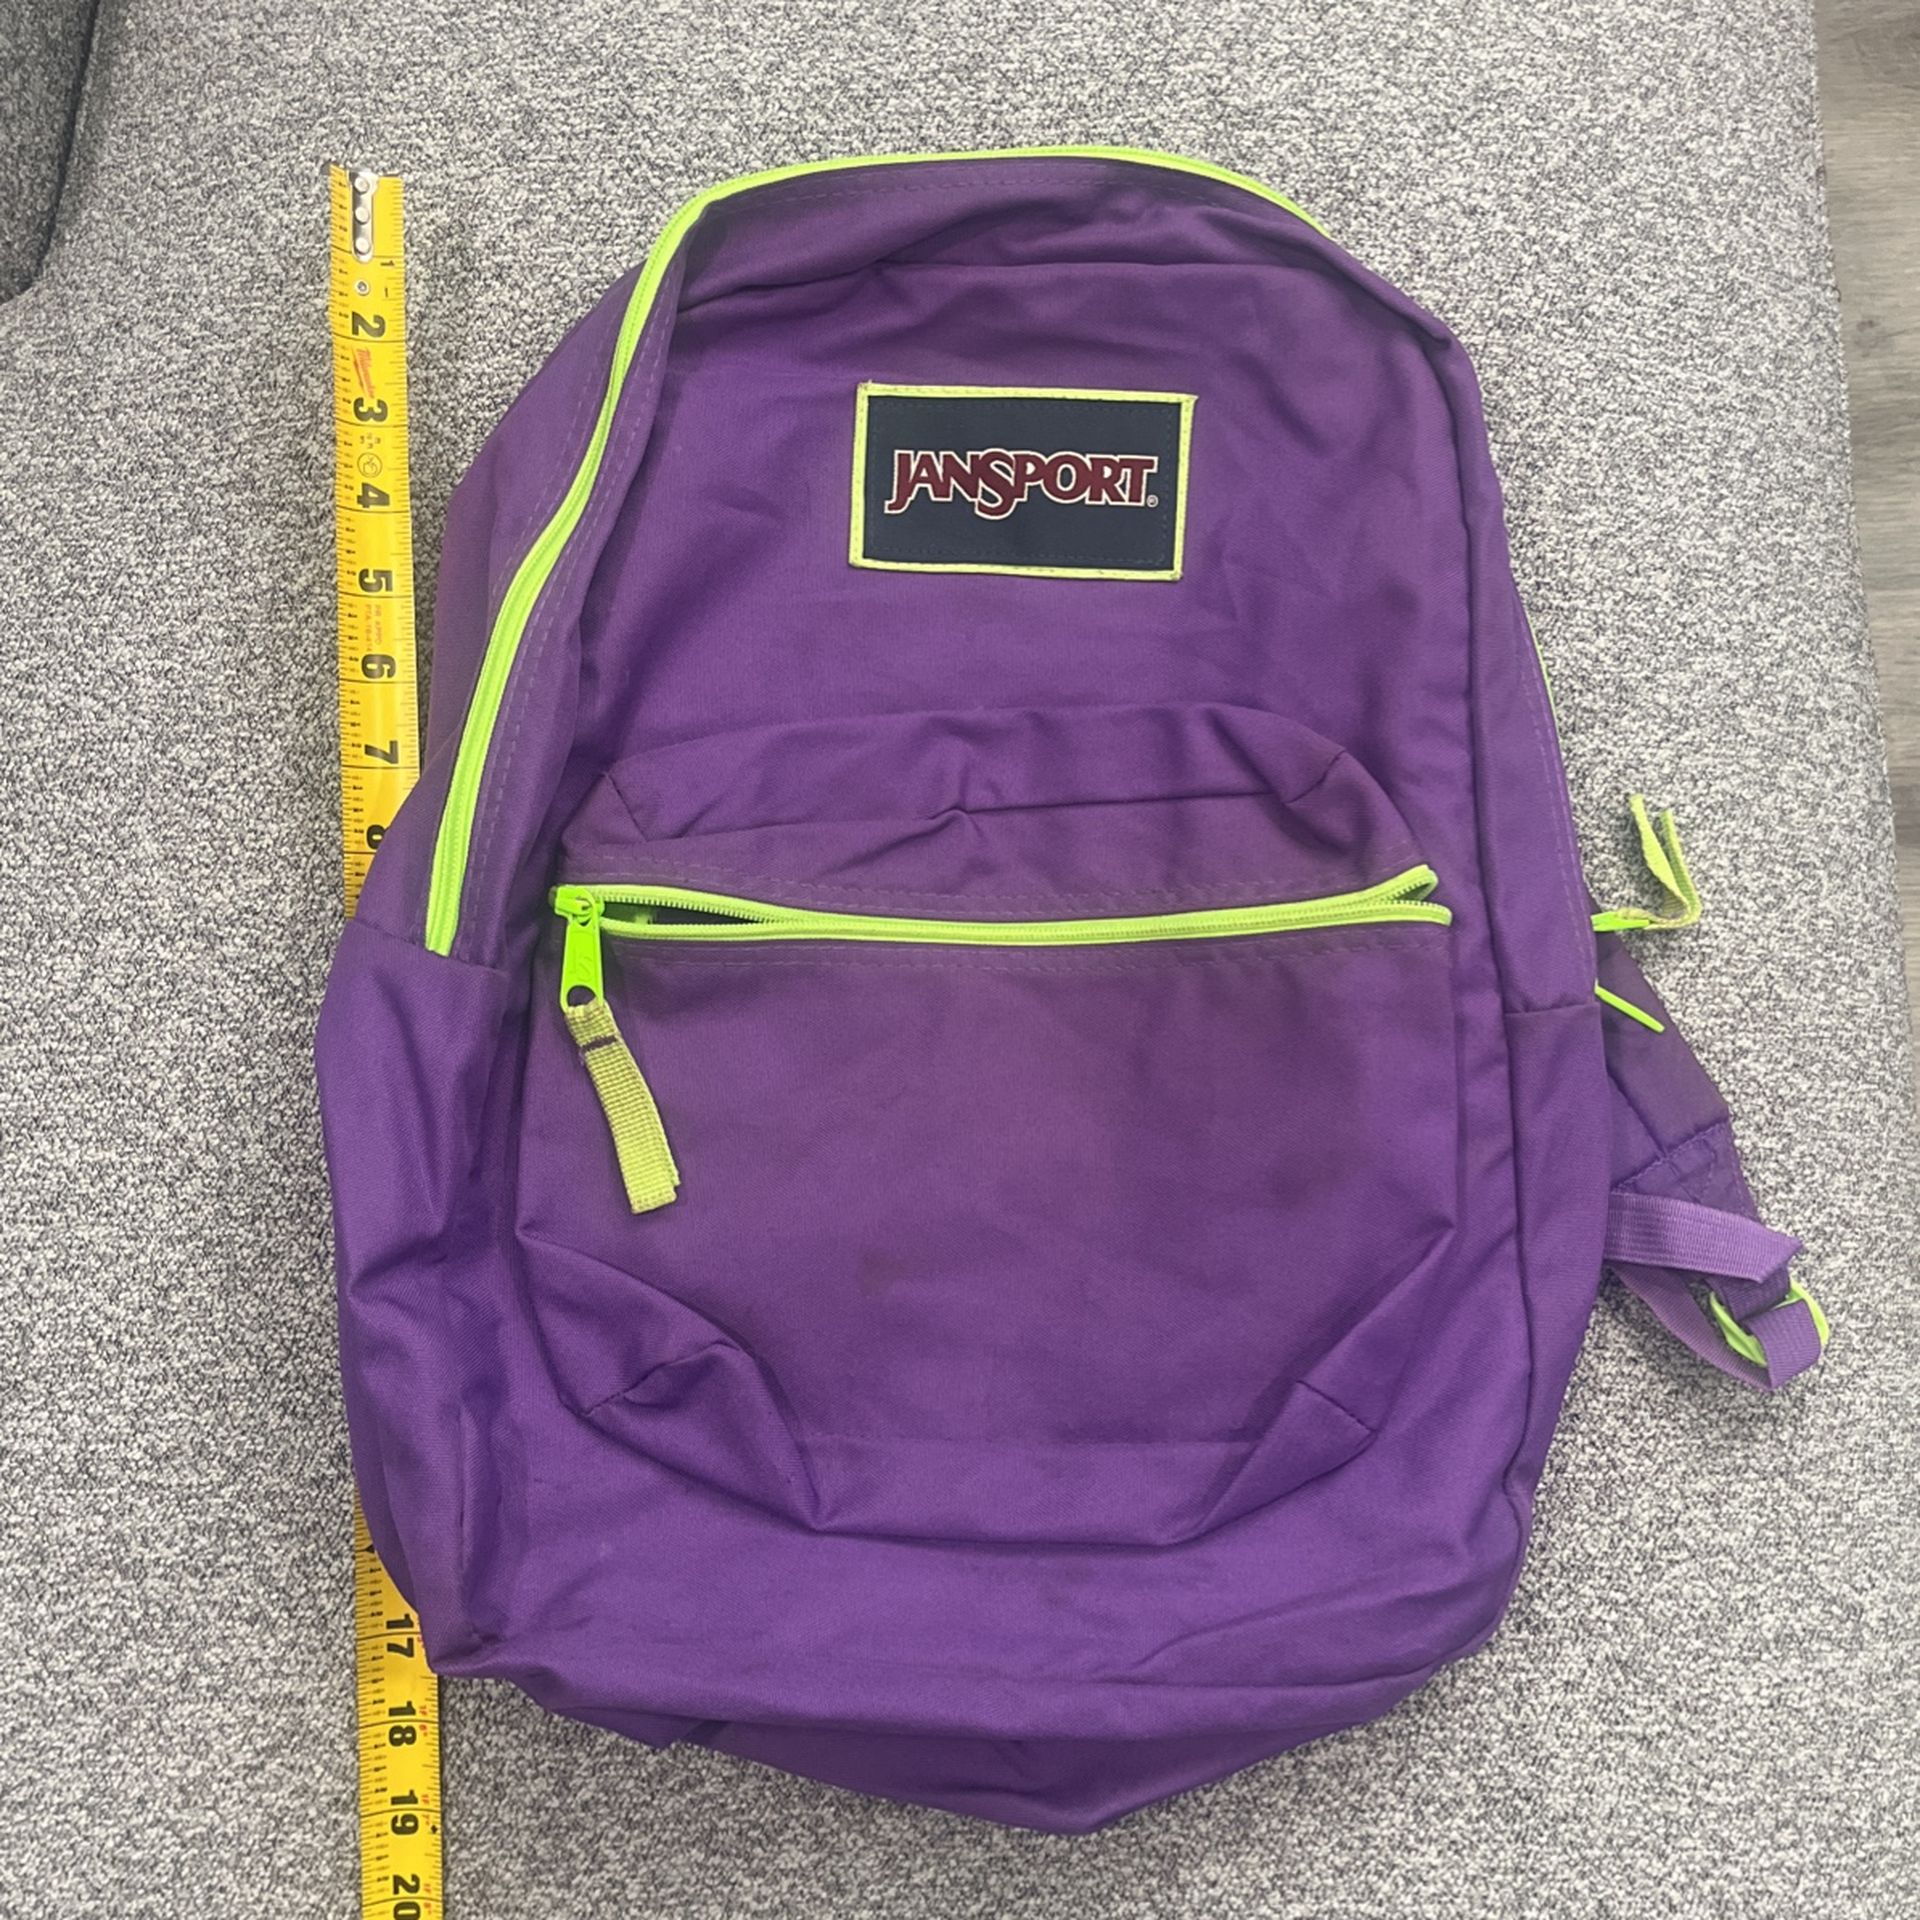 Jansport Purple And Lime Green Backpack